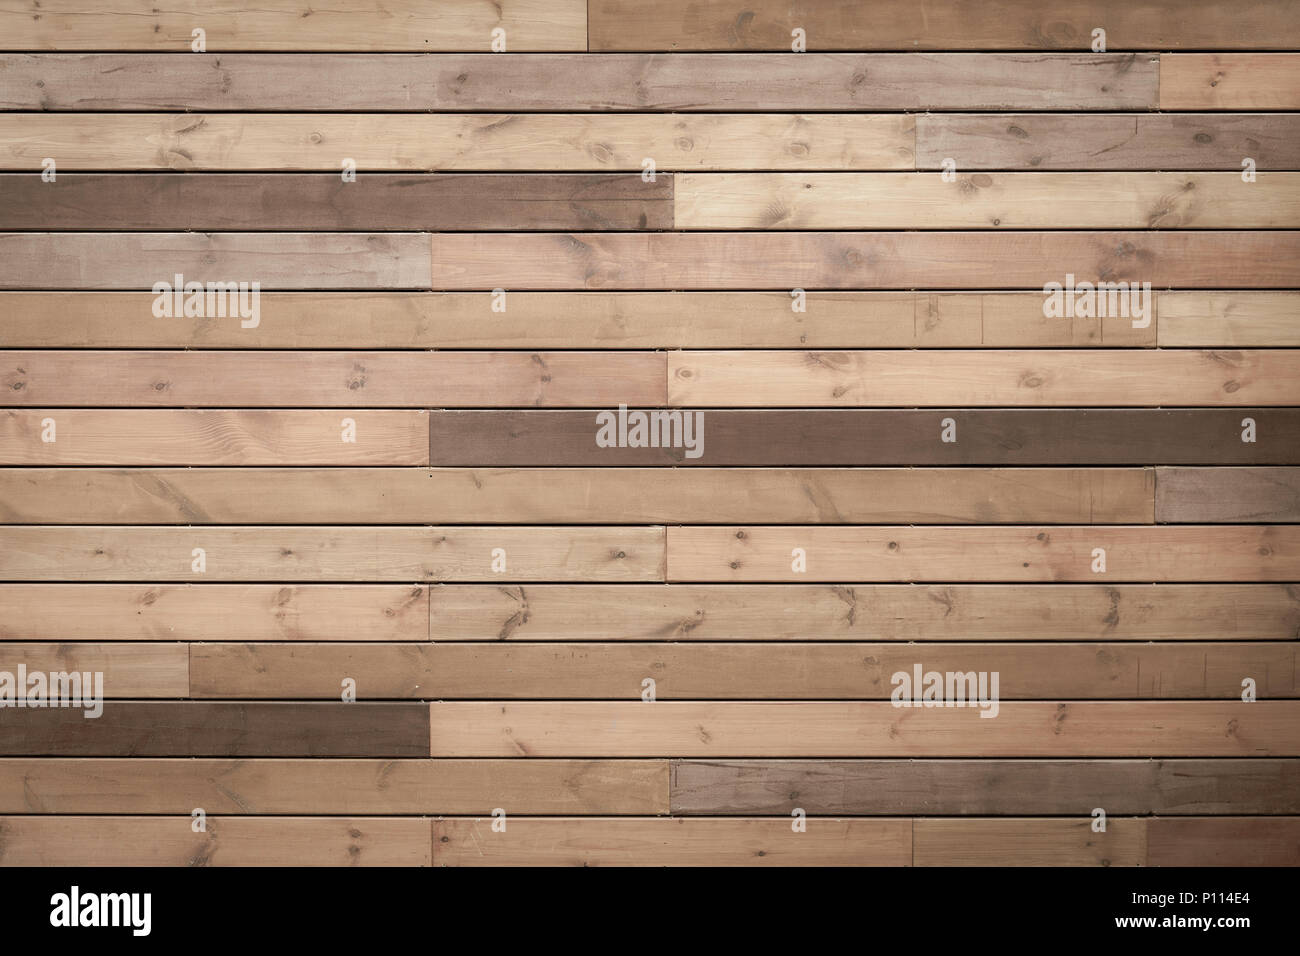 toned wood planks background or texture Stock Photo